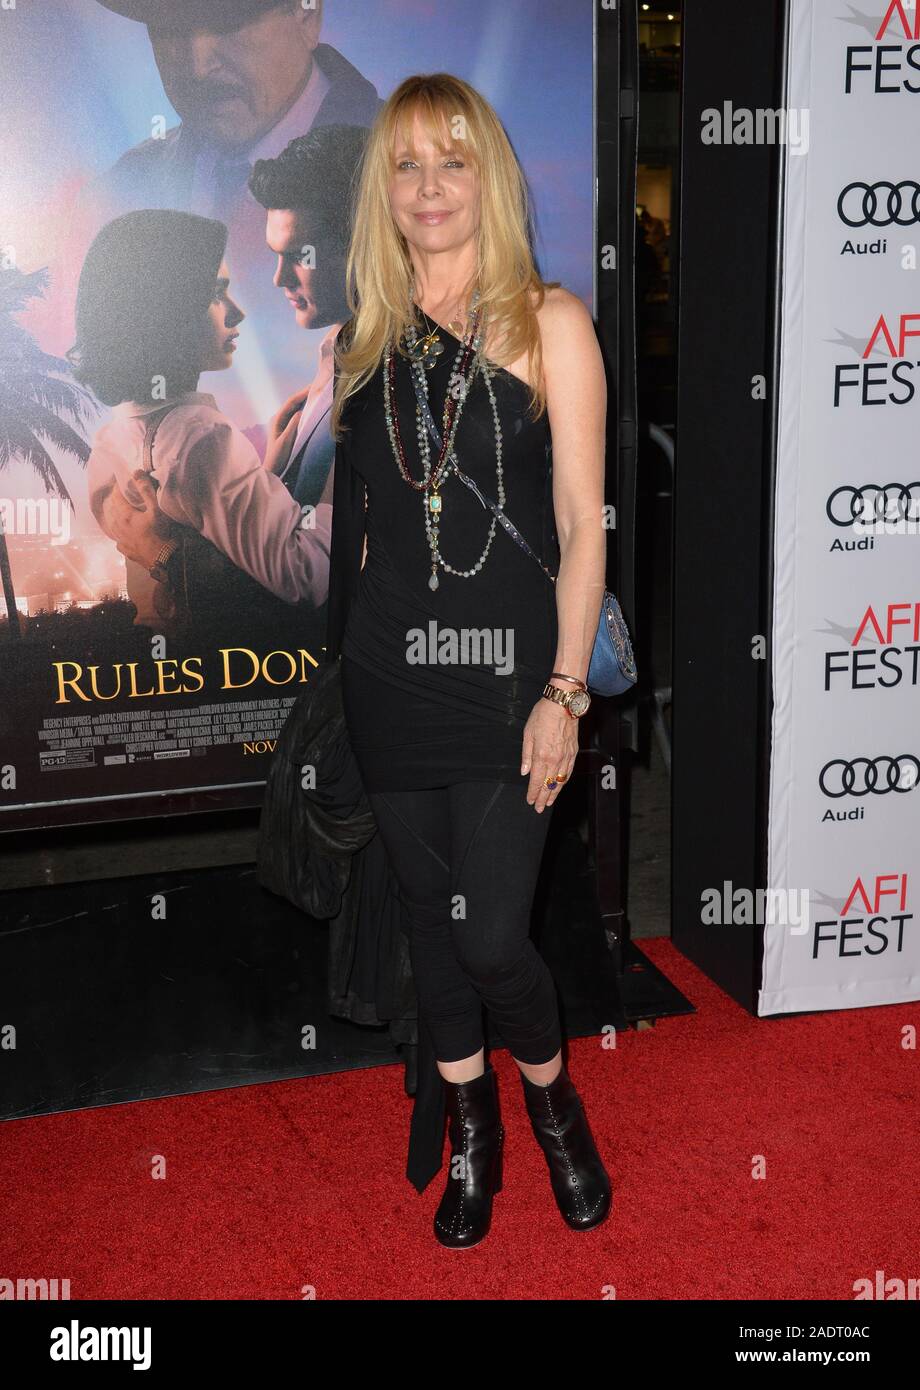 LOS ANGELES, CA. November 10, 2016: Actress Rosanna Arquette at premiere of "Rules Don't Apply" at the TCL Chinese Theatre © 2016 Paul Smith / Featureflash Stock Photo